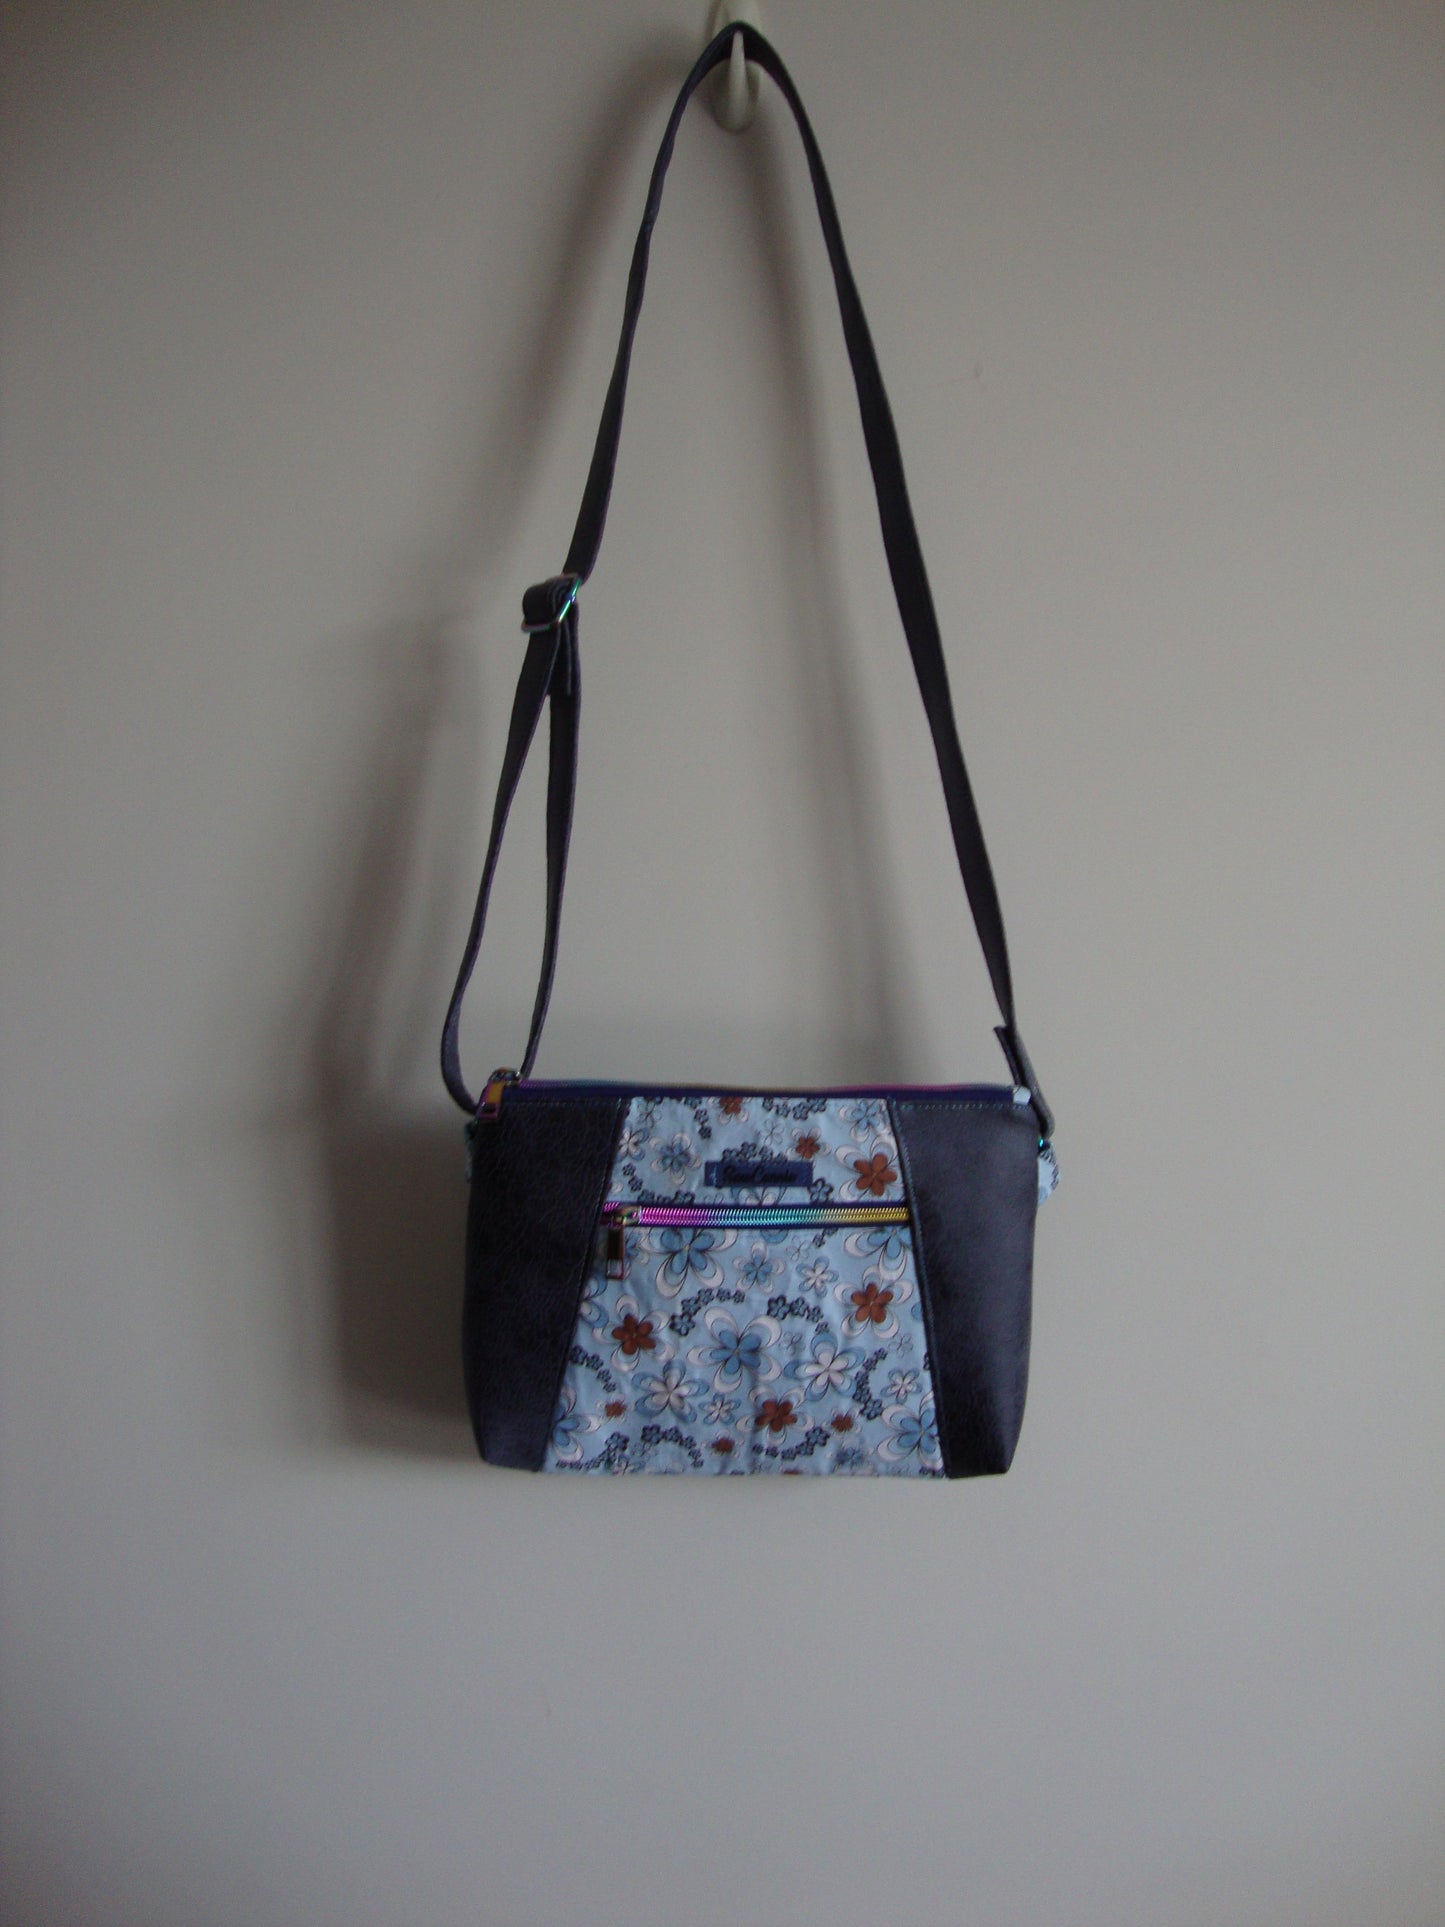 Blue and White Floral with Dark Blue Vinyl Crossbody Bag